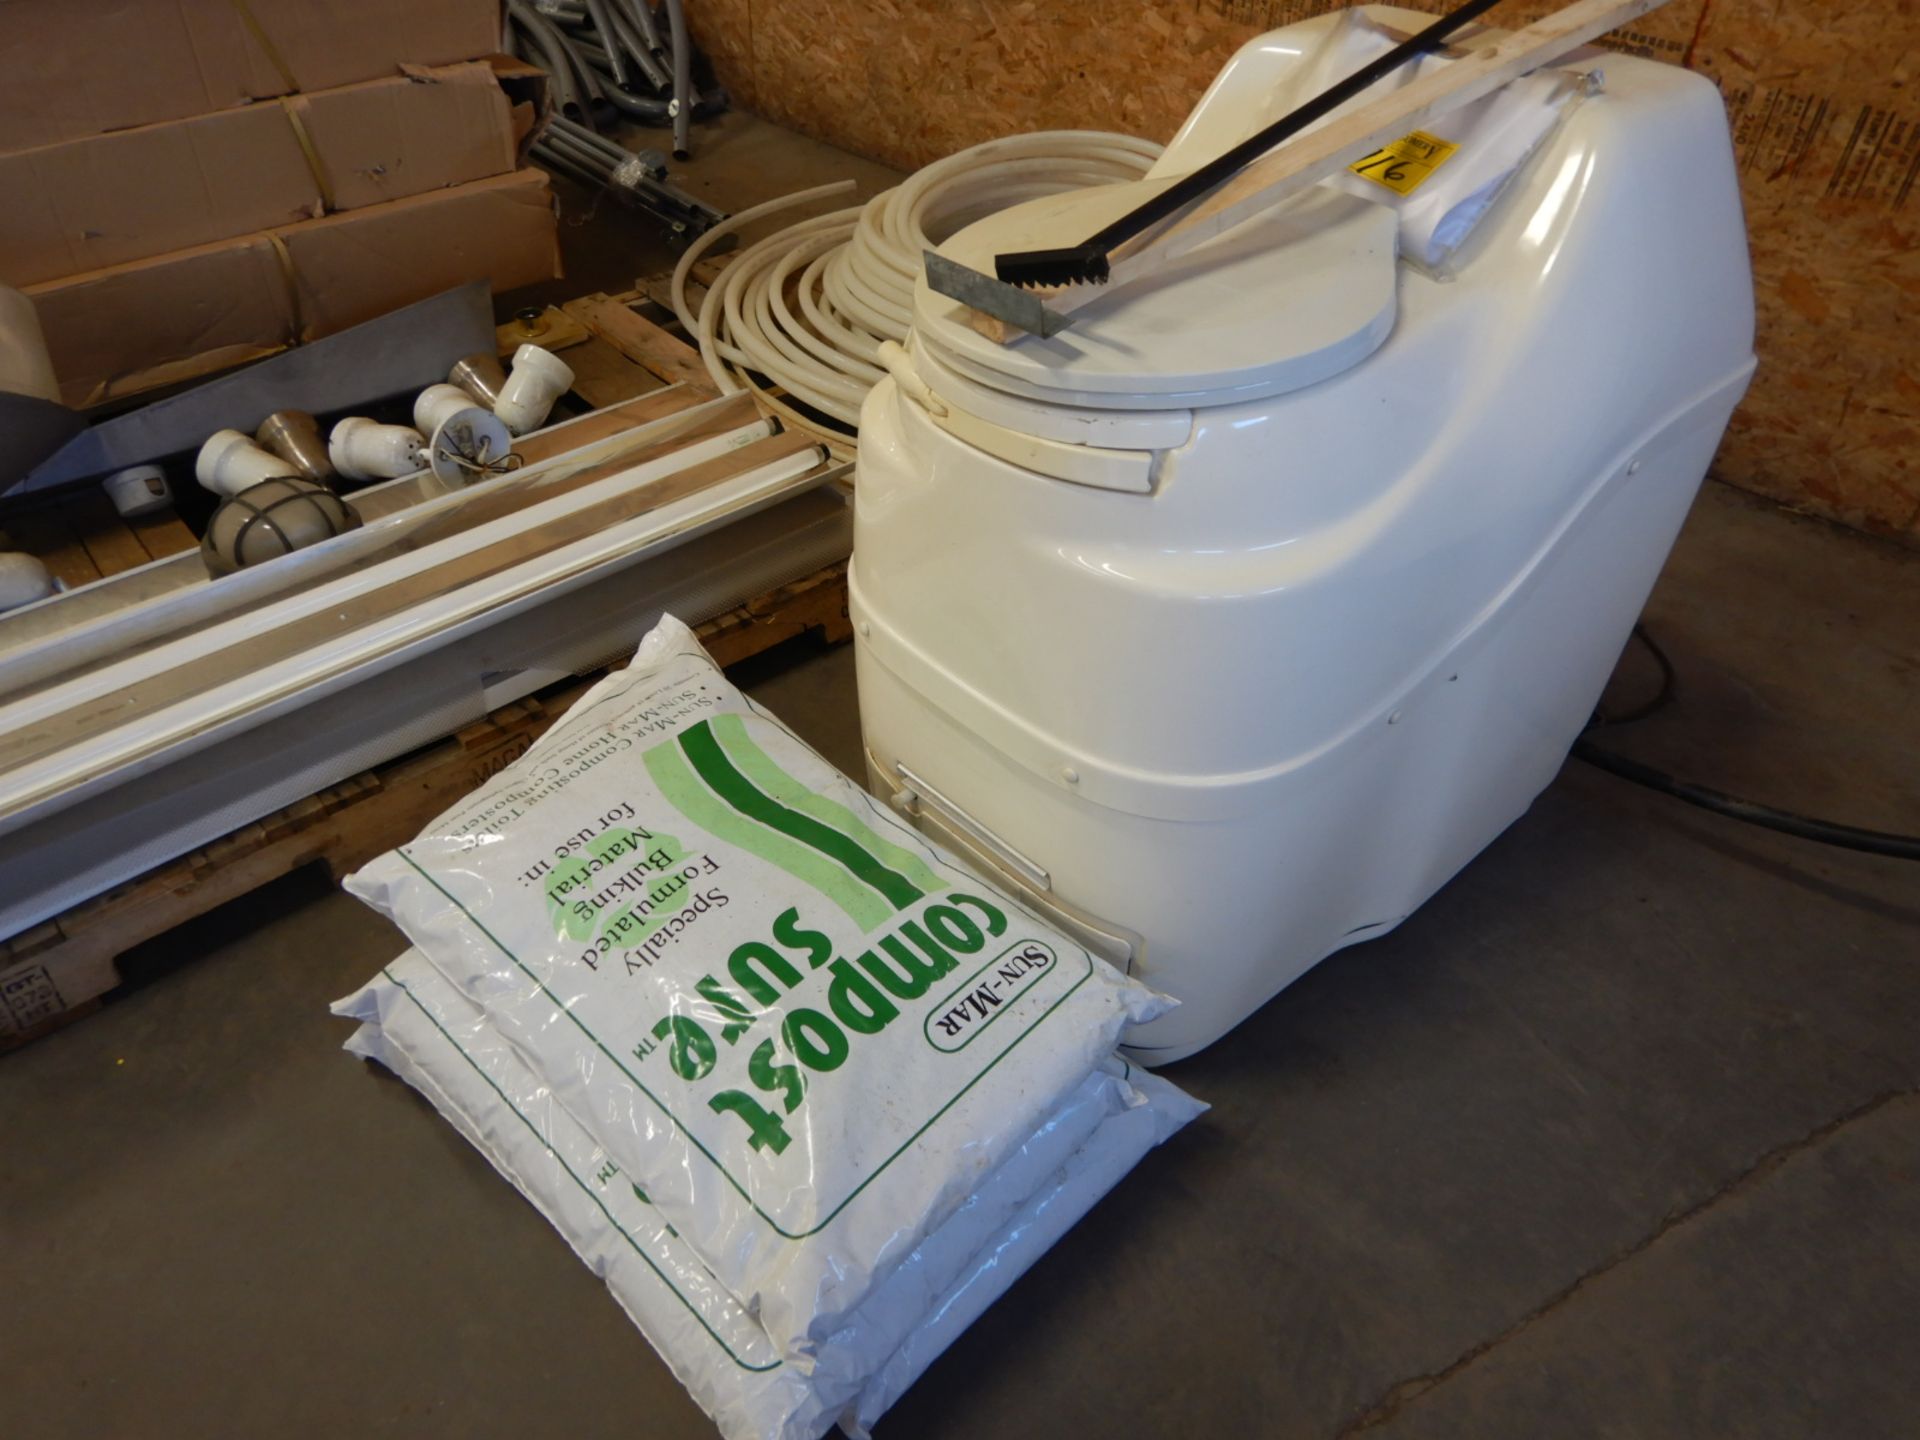 SUN-MAR EXCEL COMPOSTING TOILET W/4 BAGS COMPOST SURE BULKING MATERIAL - Image 8 of 8